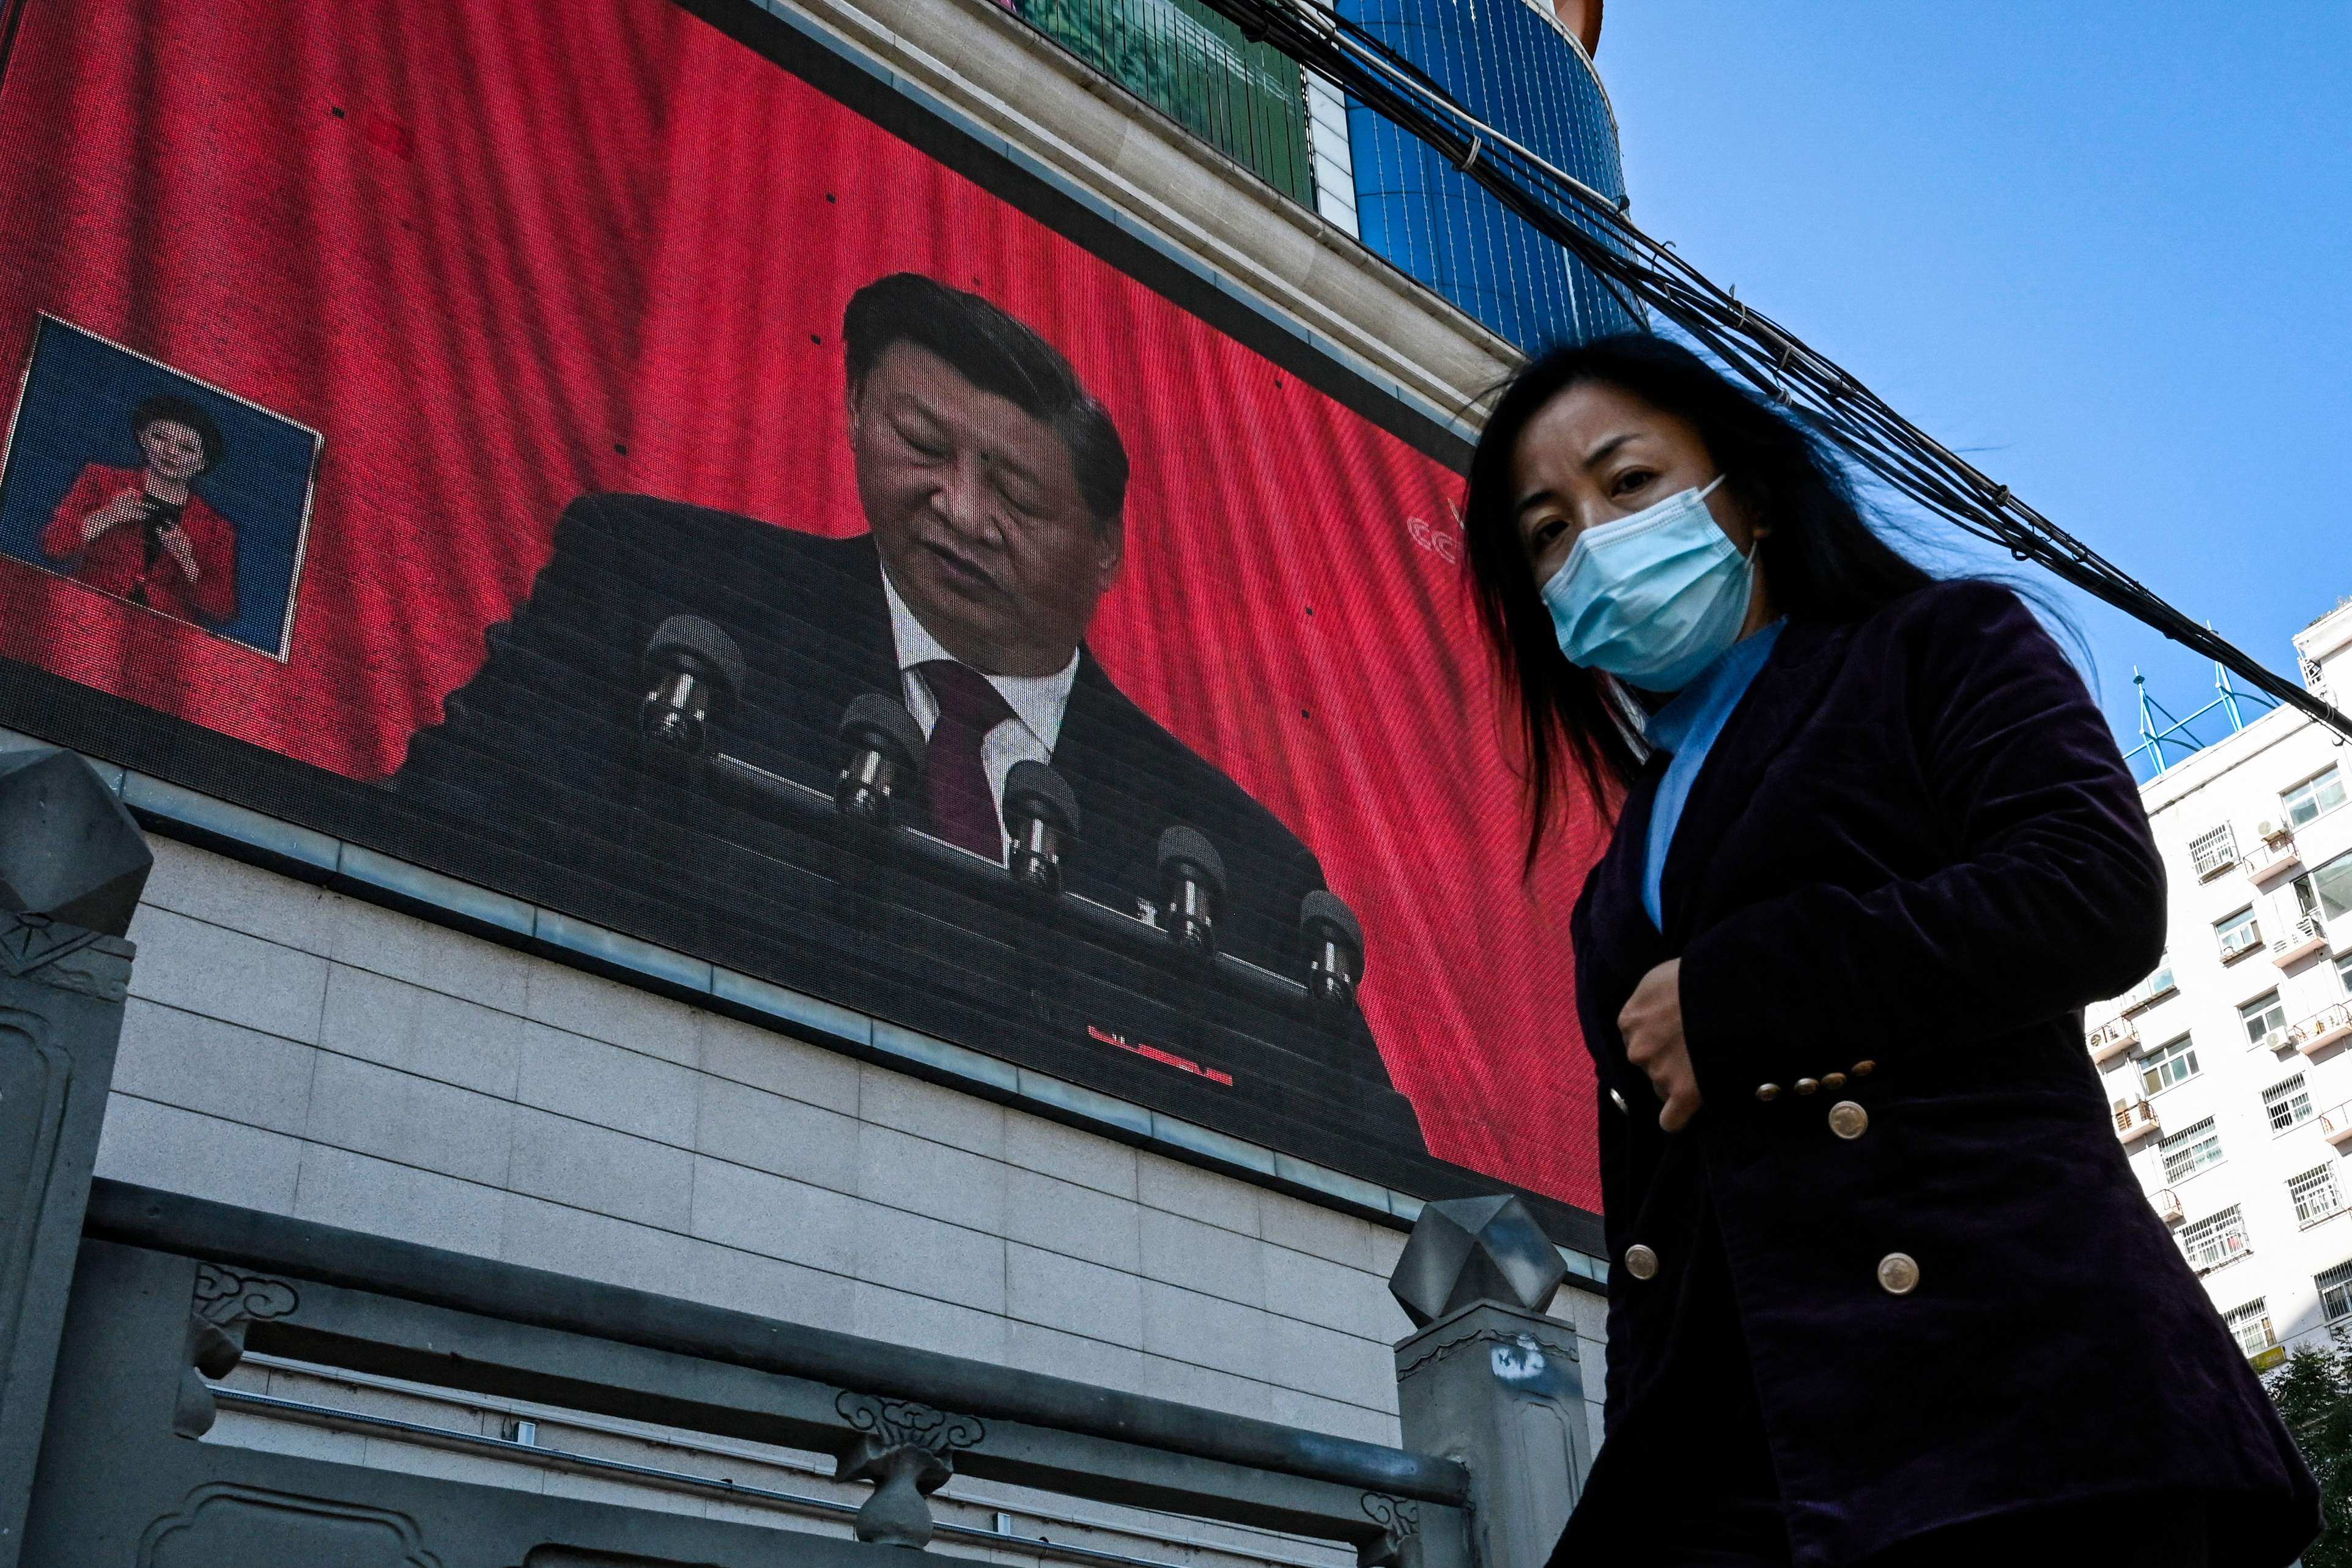 Xi Jinping is seen on a screen in Yan’an city, China, as he speaks at the 20th Chinese Communist Party Congress on October 16. Photo: AFP